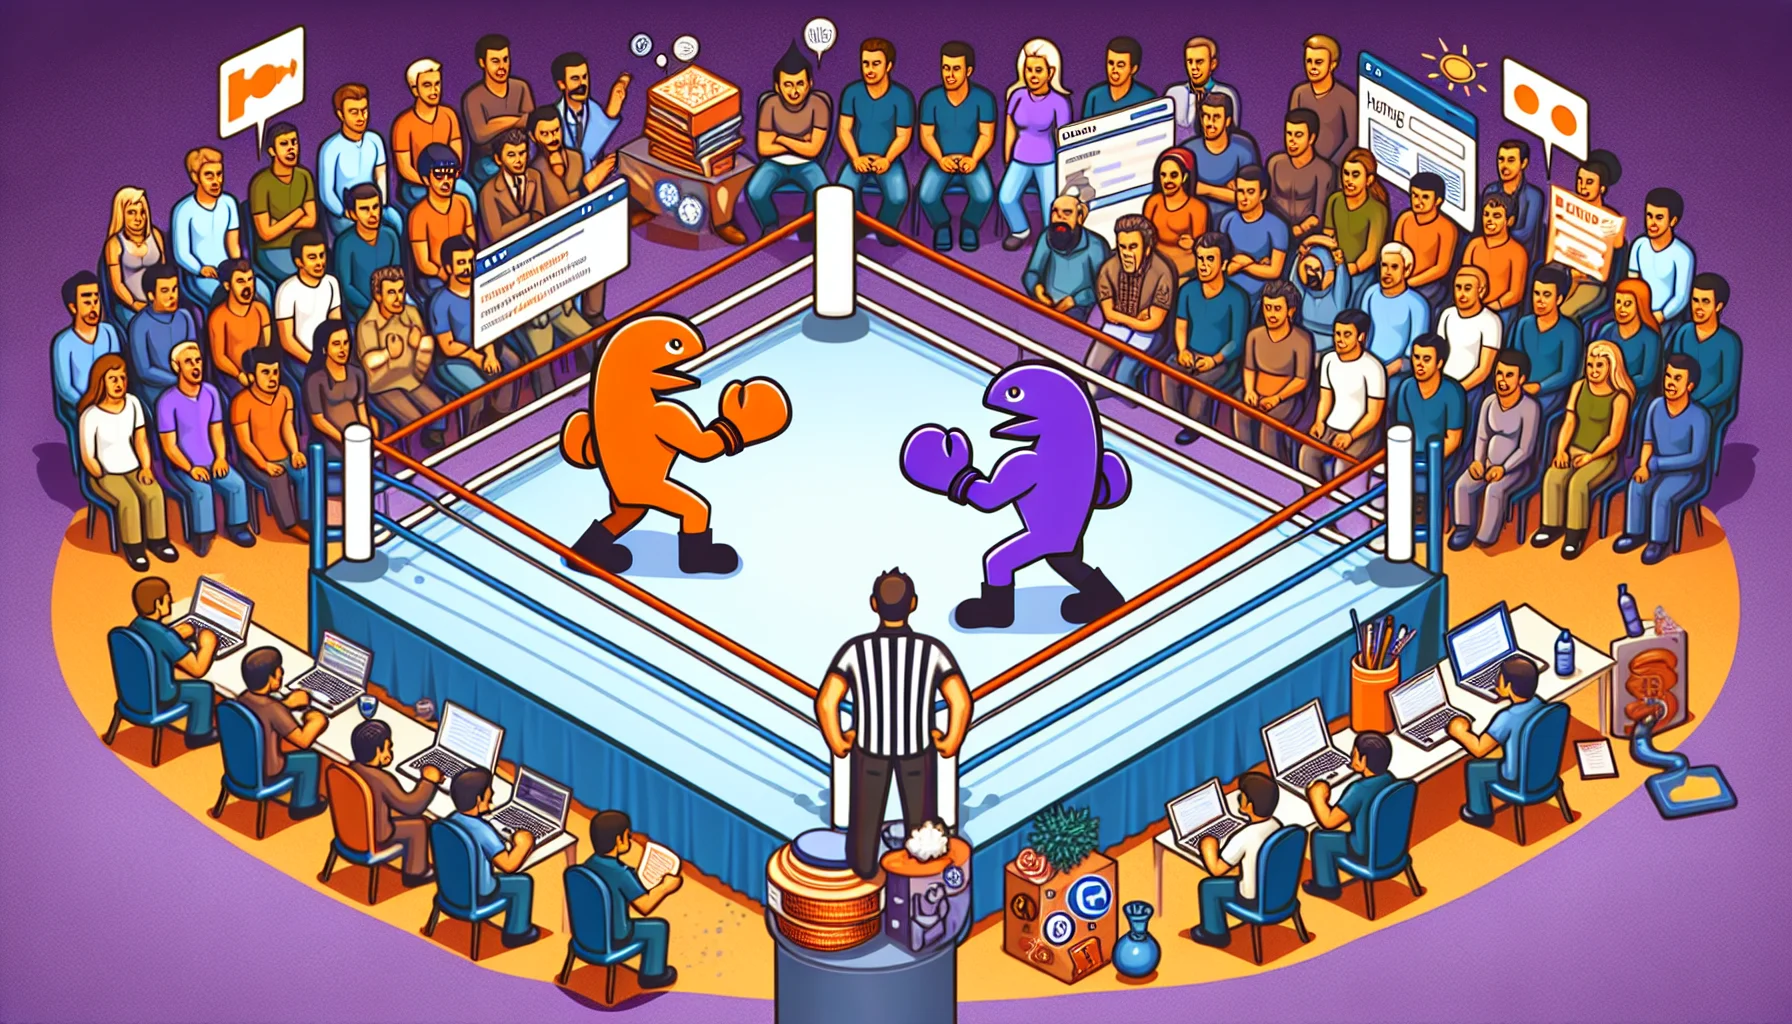 Create a humorous image showcasing a mock competition between two web development platforms - one represented by an orange symbol and the other by a purple symbol. The setting should be like a boxing ring where both platforms are like boxers preparing to duel. The audience is a varied mix of people representing website developers and designers, all excitedly watching the competition. The ring is surrounded by hints and symbolism indicating the battle is about web hosting. Some humorous elements could be the overly dramatic preparations of the players, the eager audience reactions, and some comedic referee interactions.